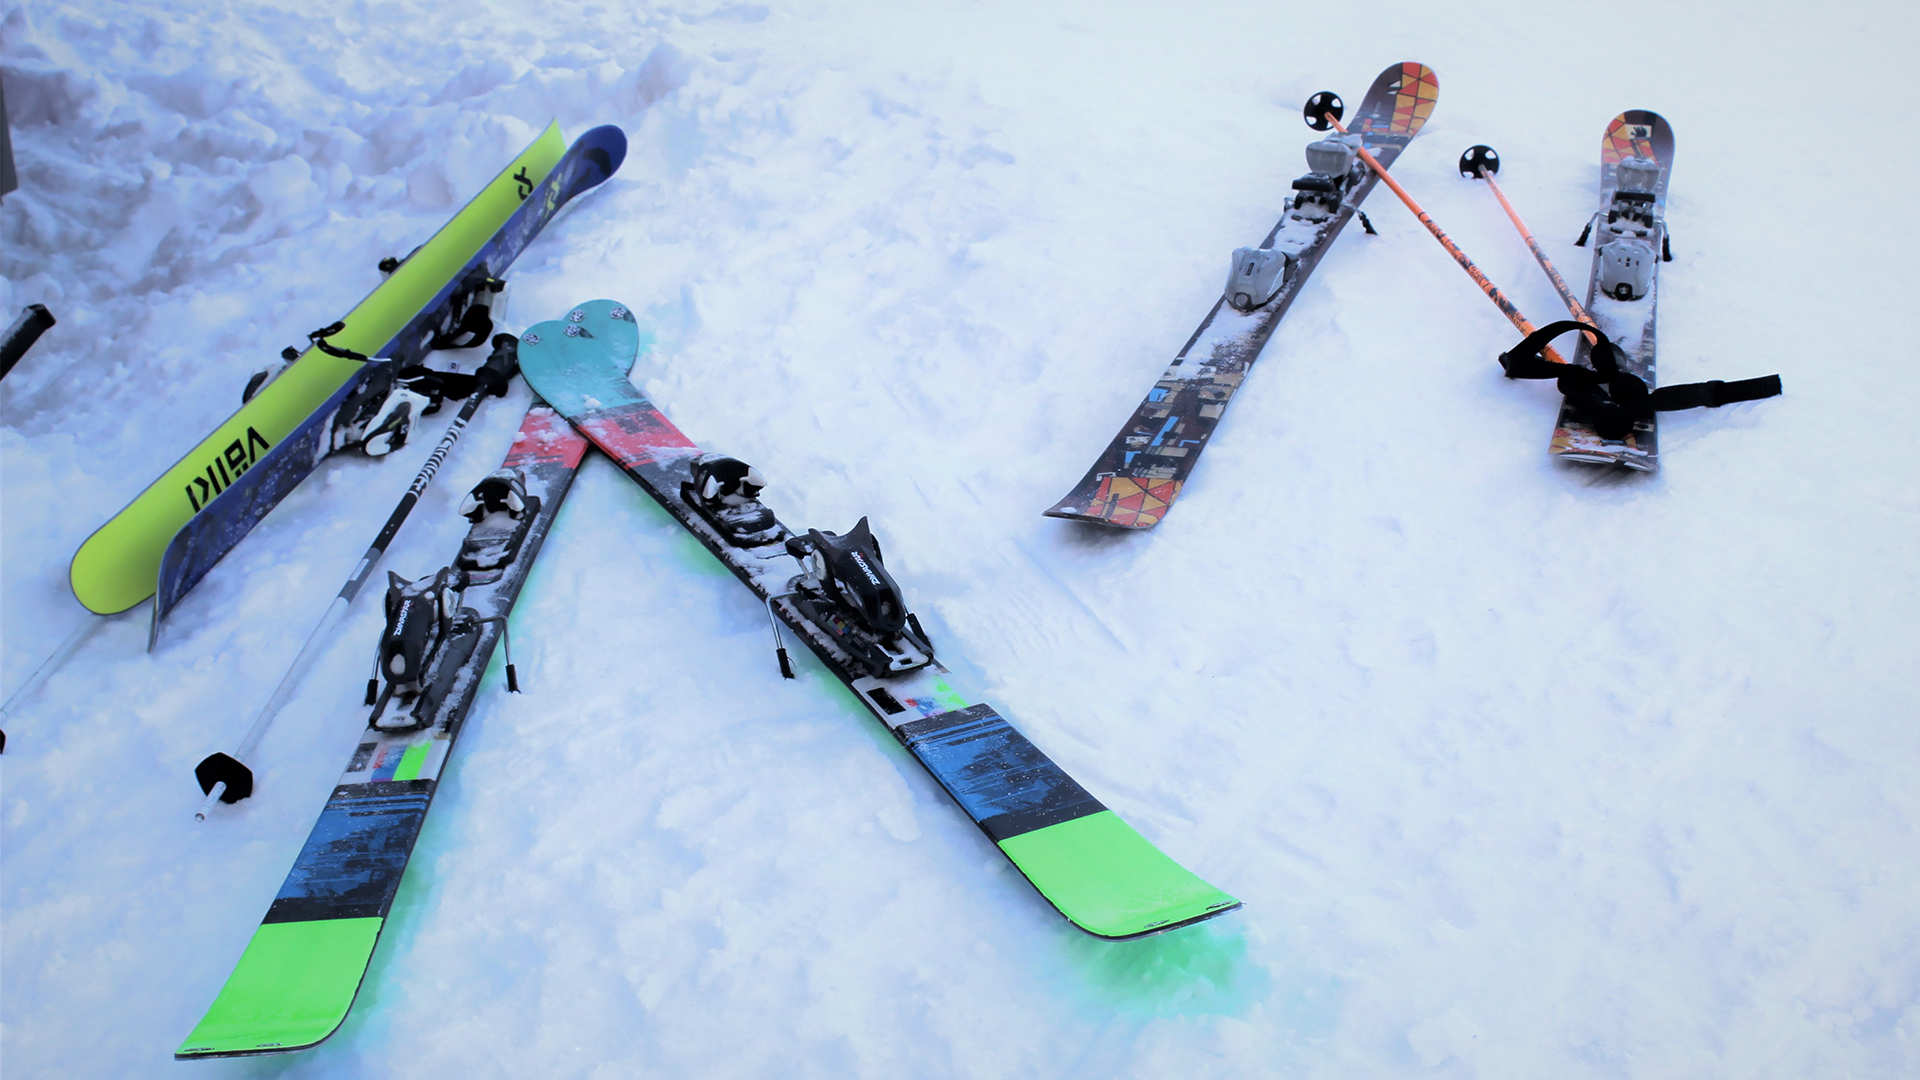 Three pairs of skis and poles laid on snow.